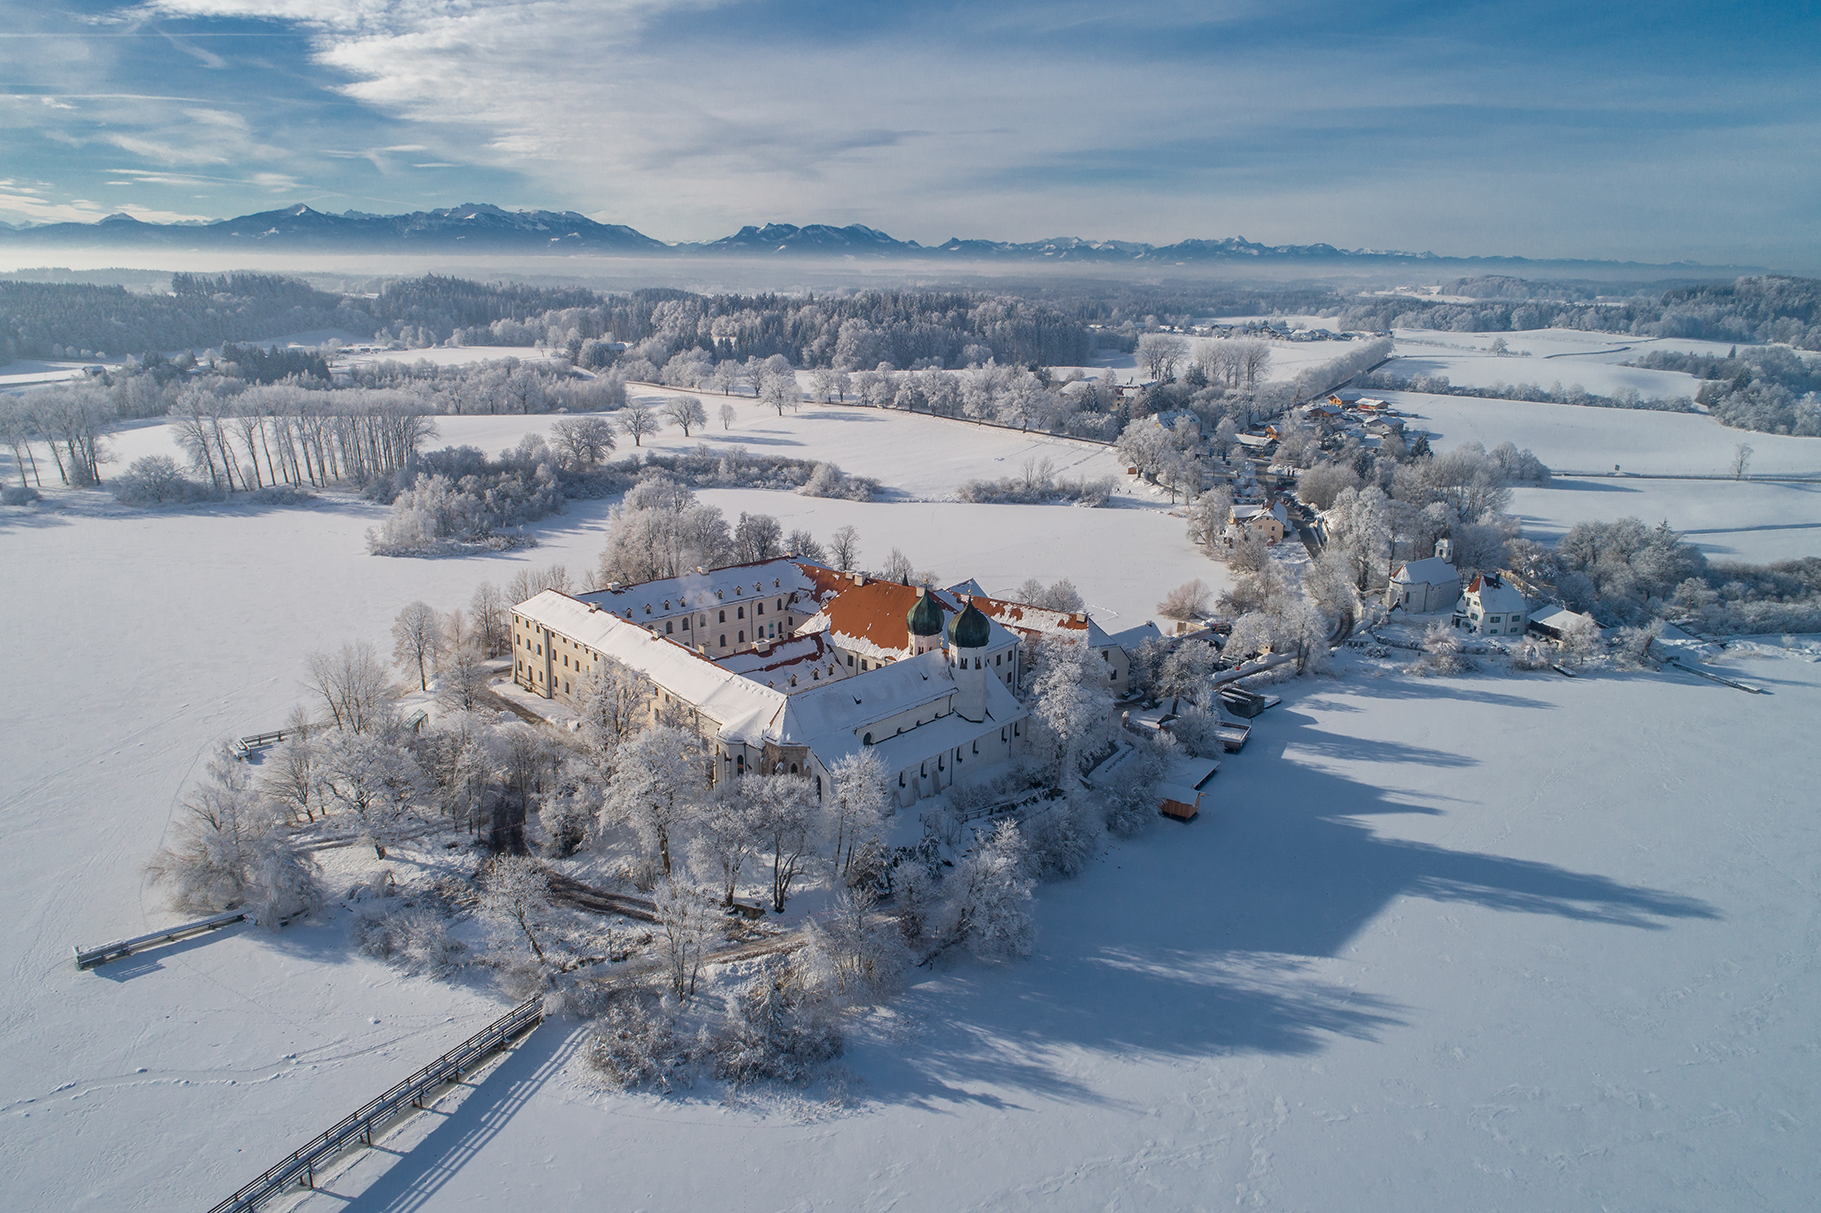 areal view of Seeon monastery in a winterwonderland with mountains in the background